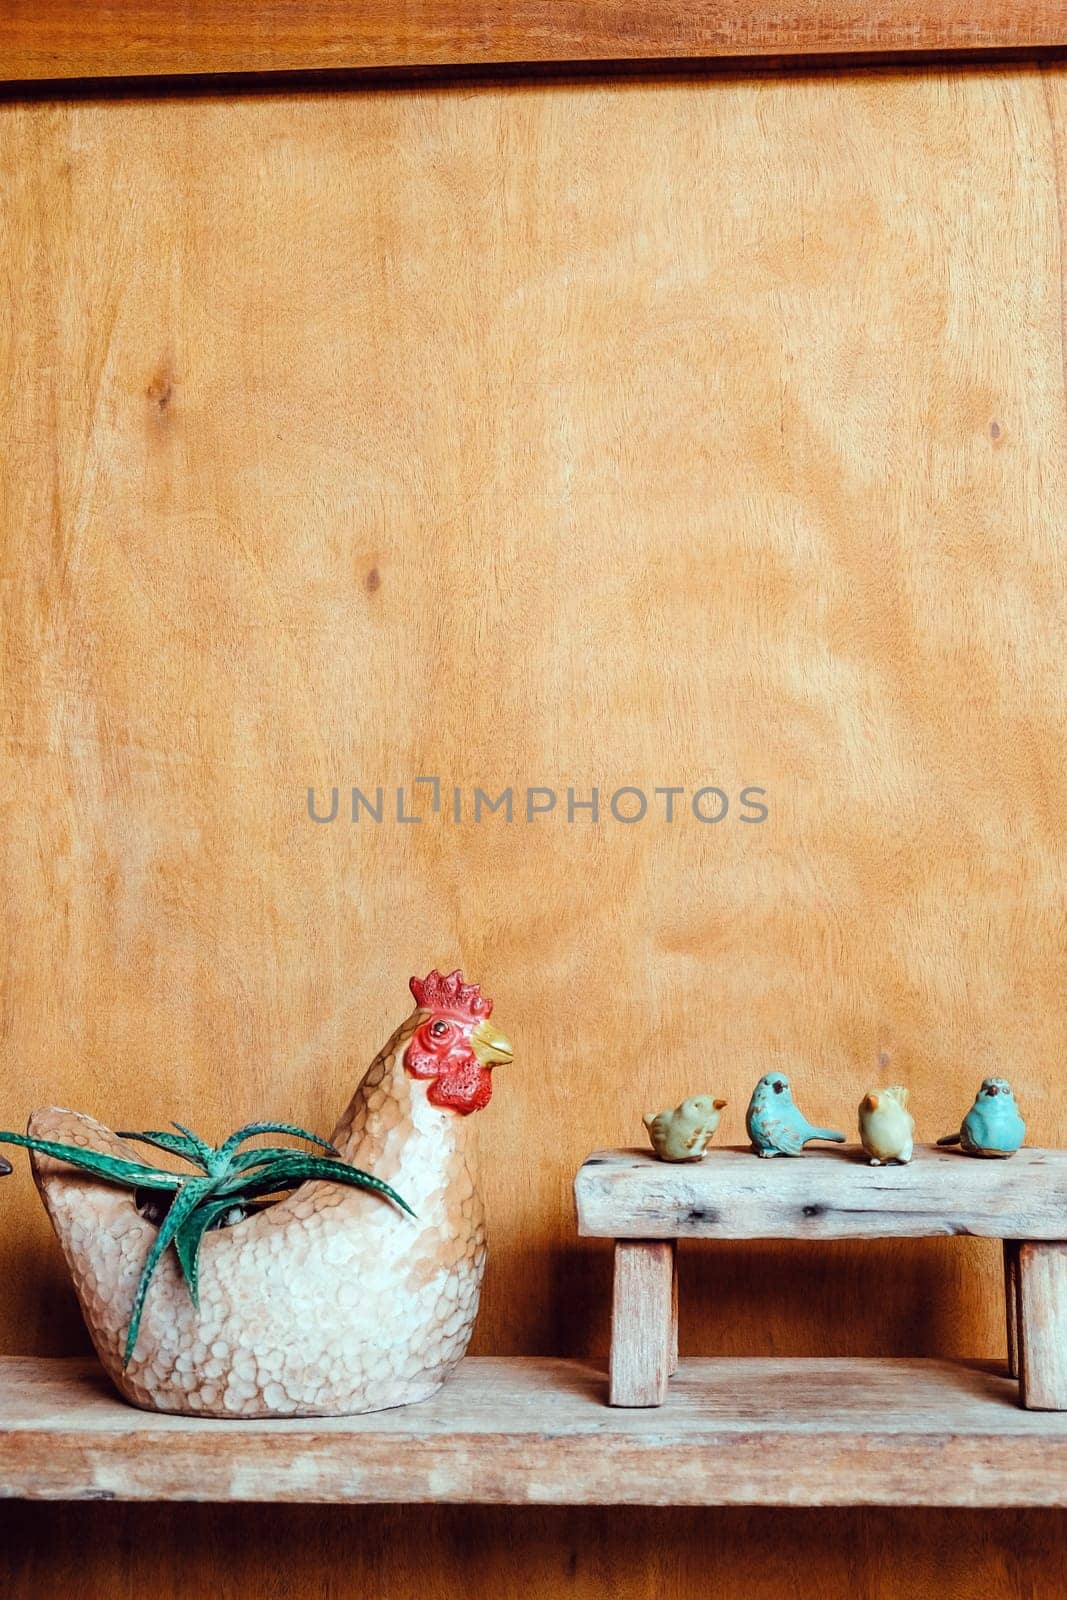 Still life image of Wooden bench and small birds with plant pot on wooden background.